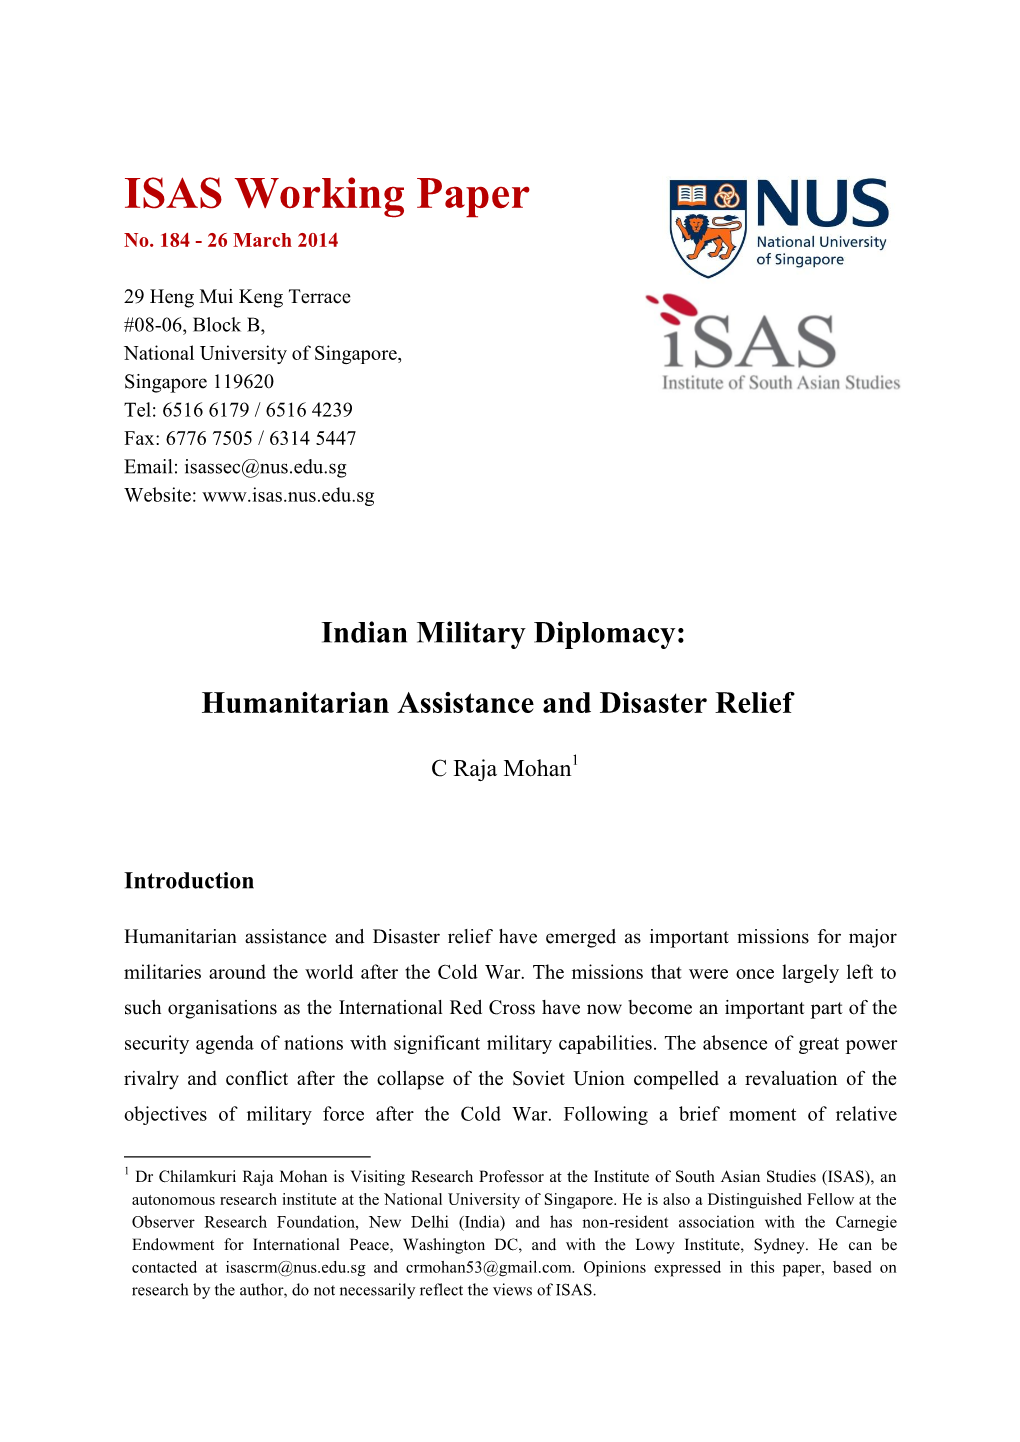 Humanitarian Assistance and Disaster Relief